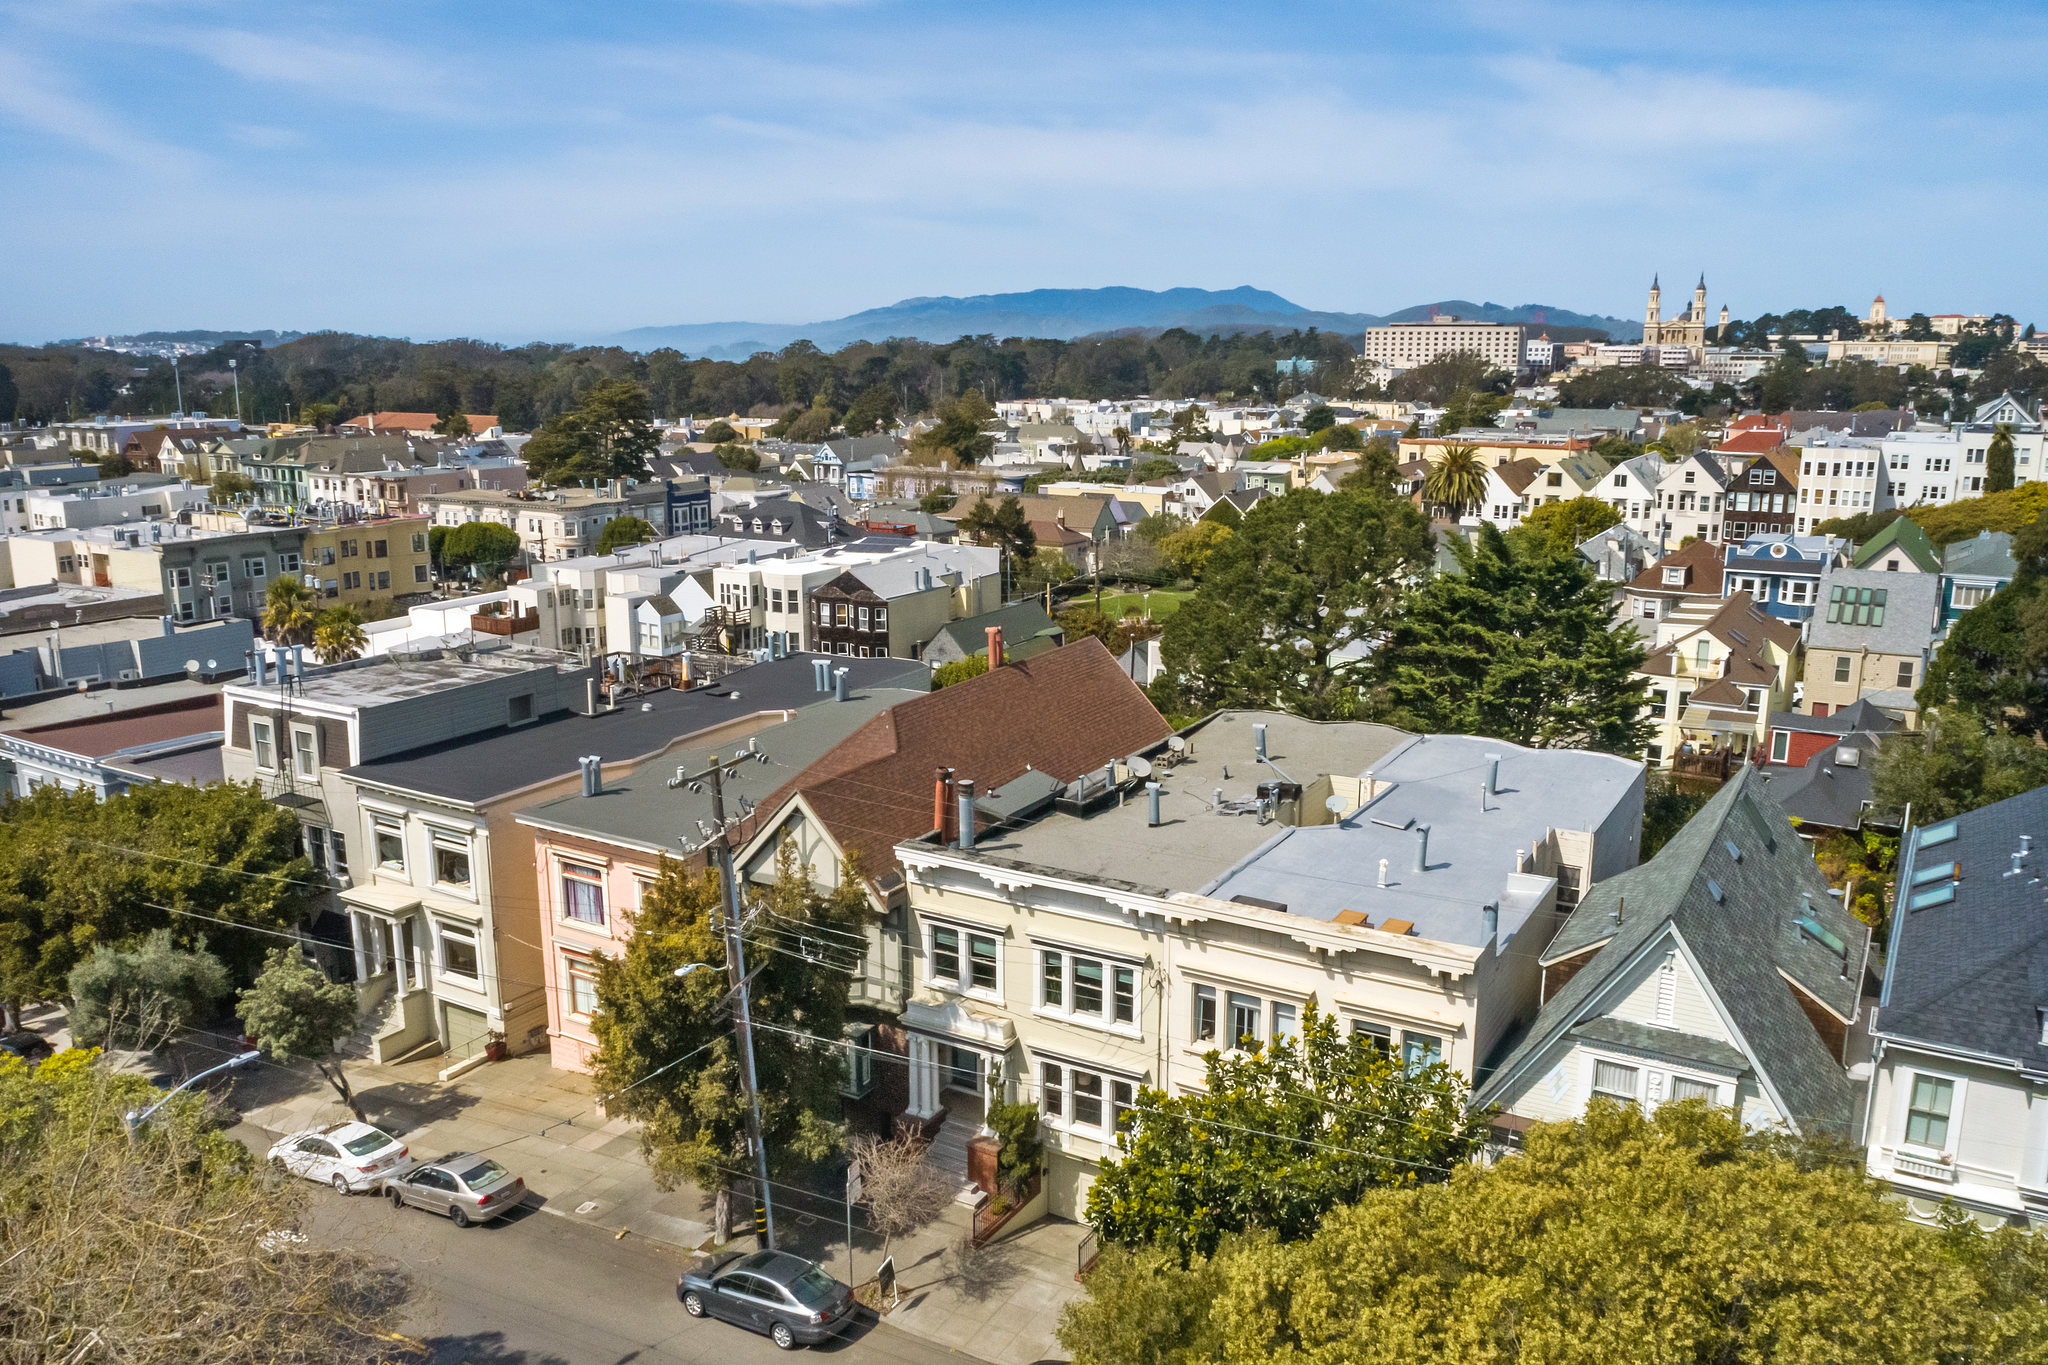 Property Photo: Aerial view of 36 Parnassus Avenue, showing the surrounding Cole Valley neighborhood